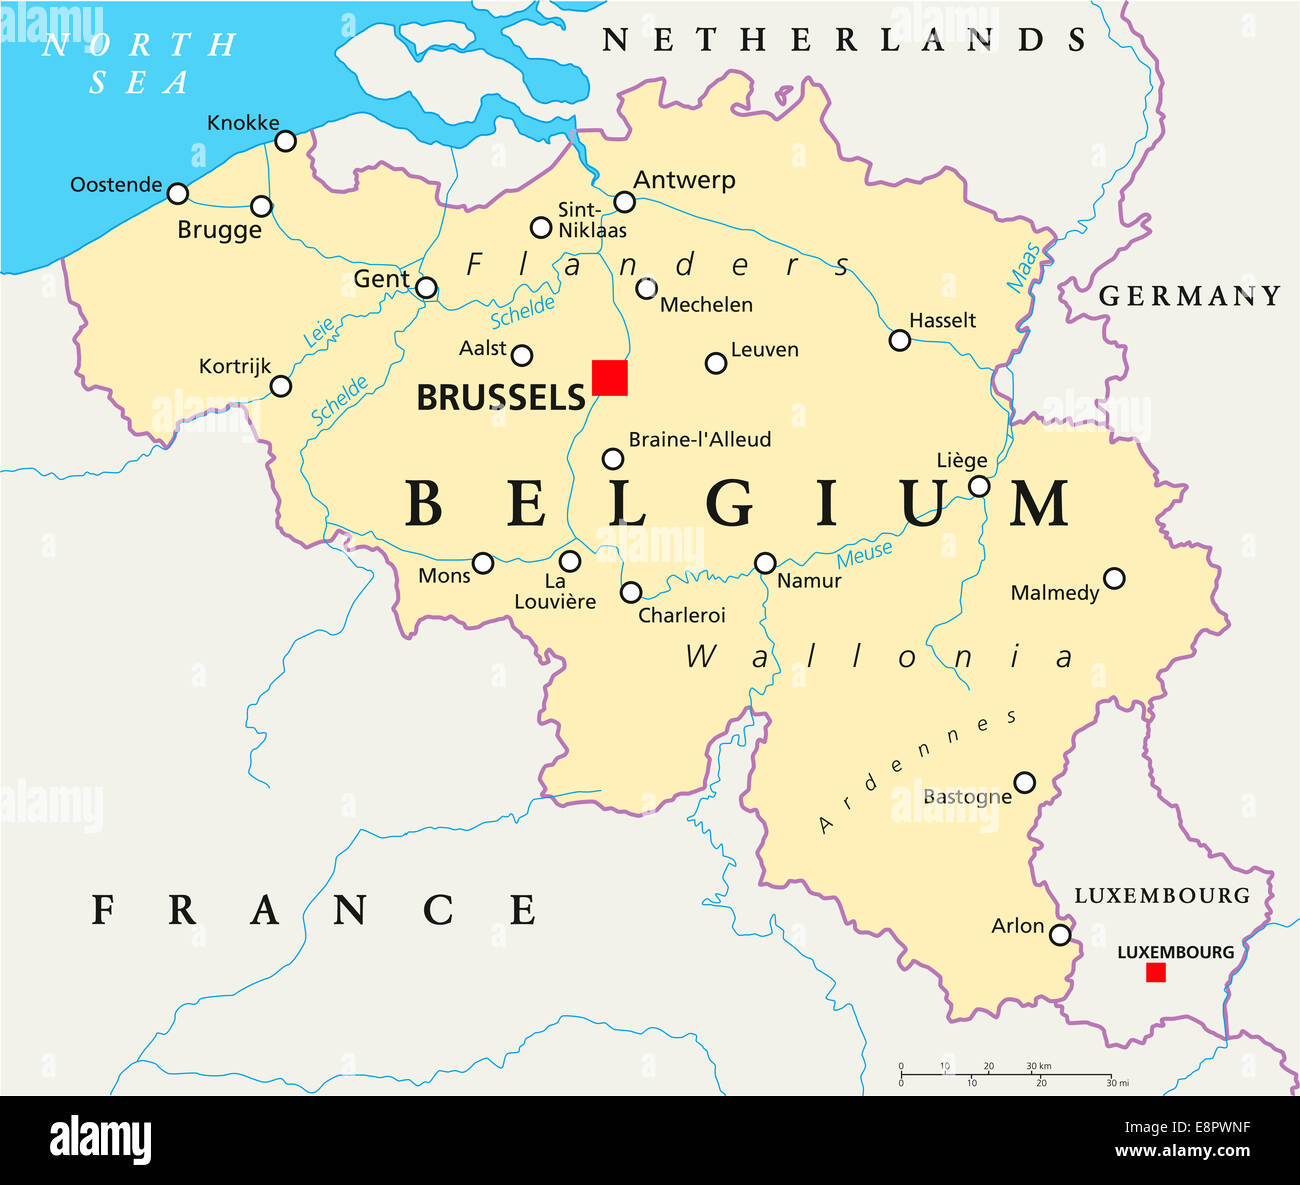 Belgium Political Map with capital Brussels, national borders, most important cities and rivers. English labeling and scaling. Stock Photo